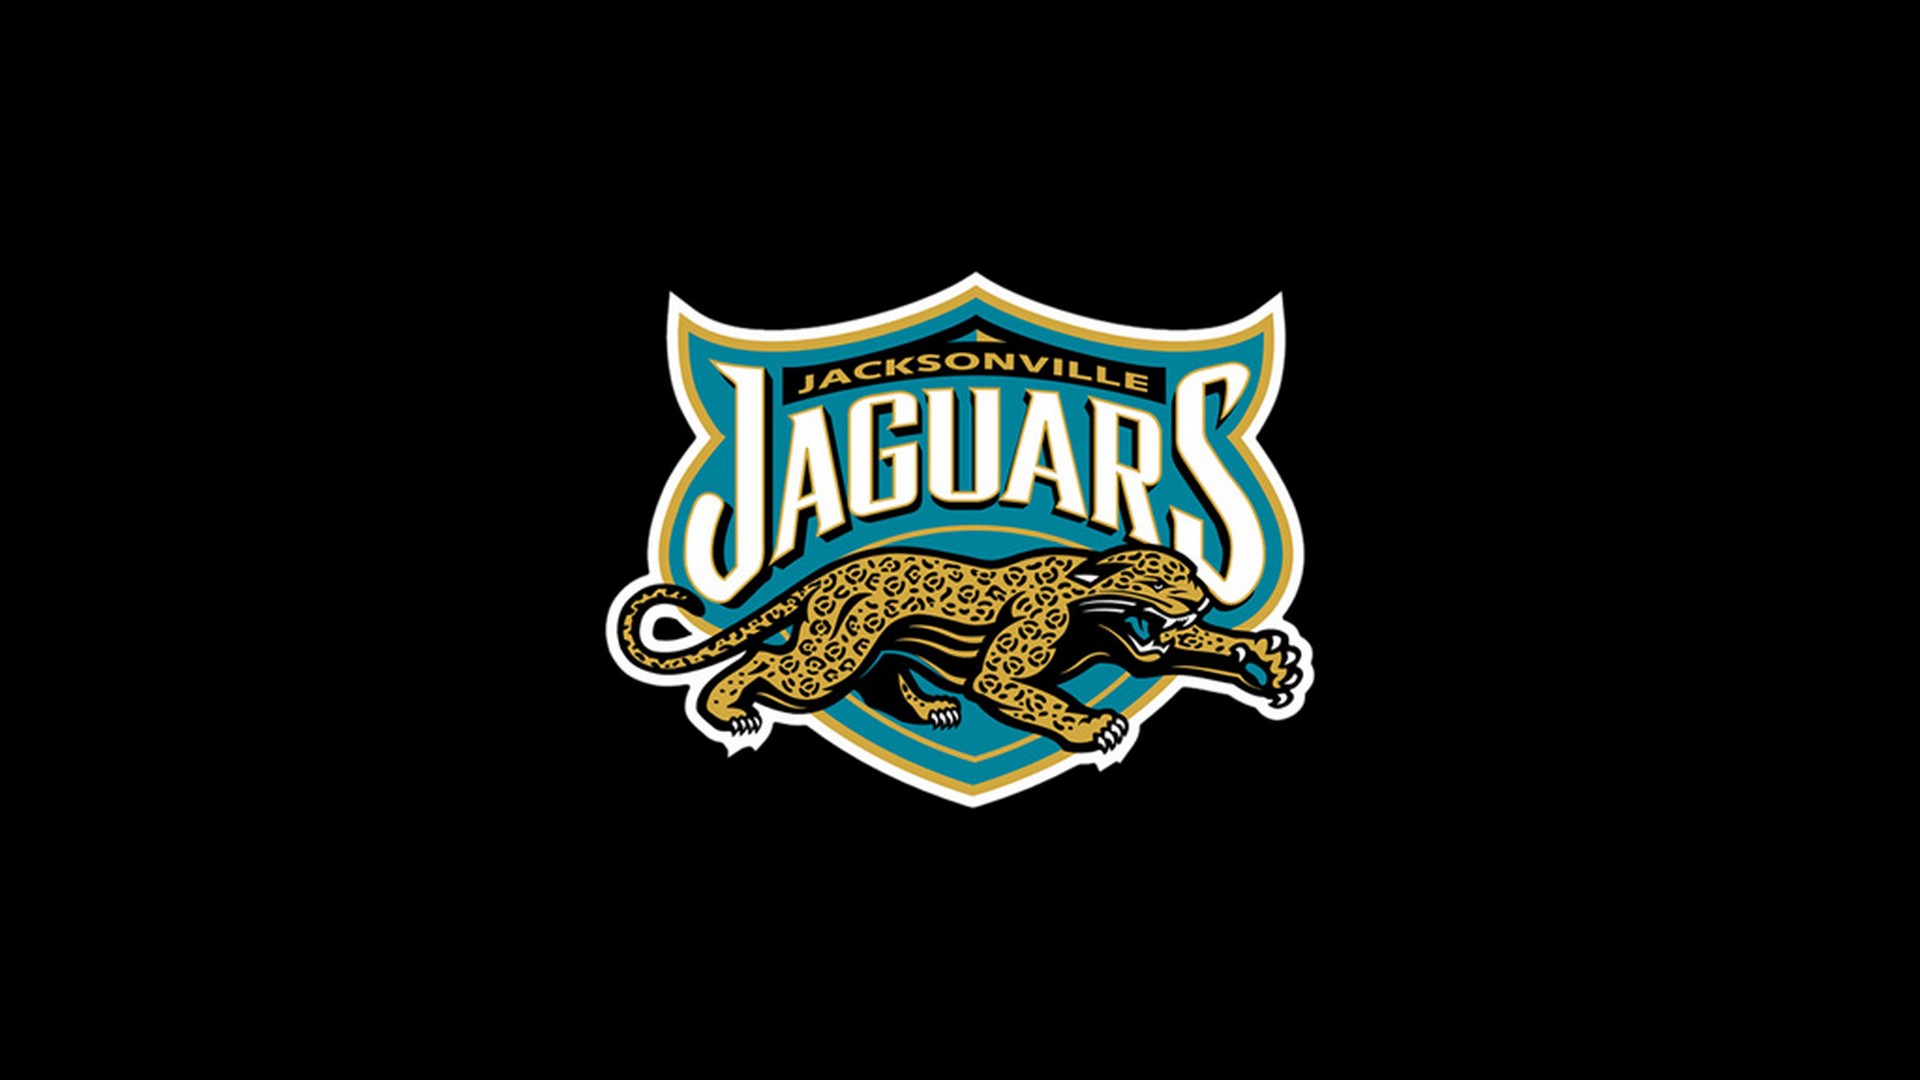 Wallpapers HD Jacksonville Jaguars With Resolution 1920X1080 pixel. You can make this wallpaper for your Mac or Windows Desktop Background, iPhone, Android or Tablet and another Smartphone device for free